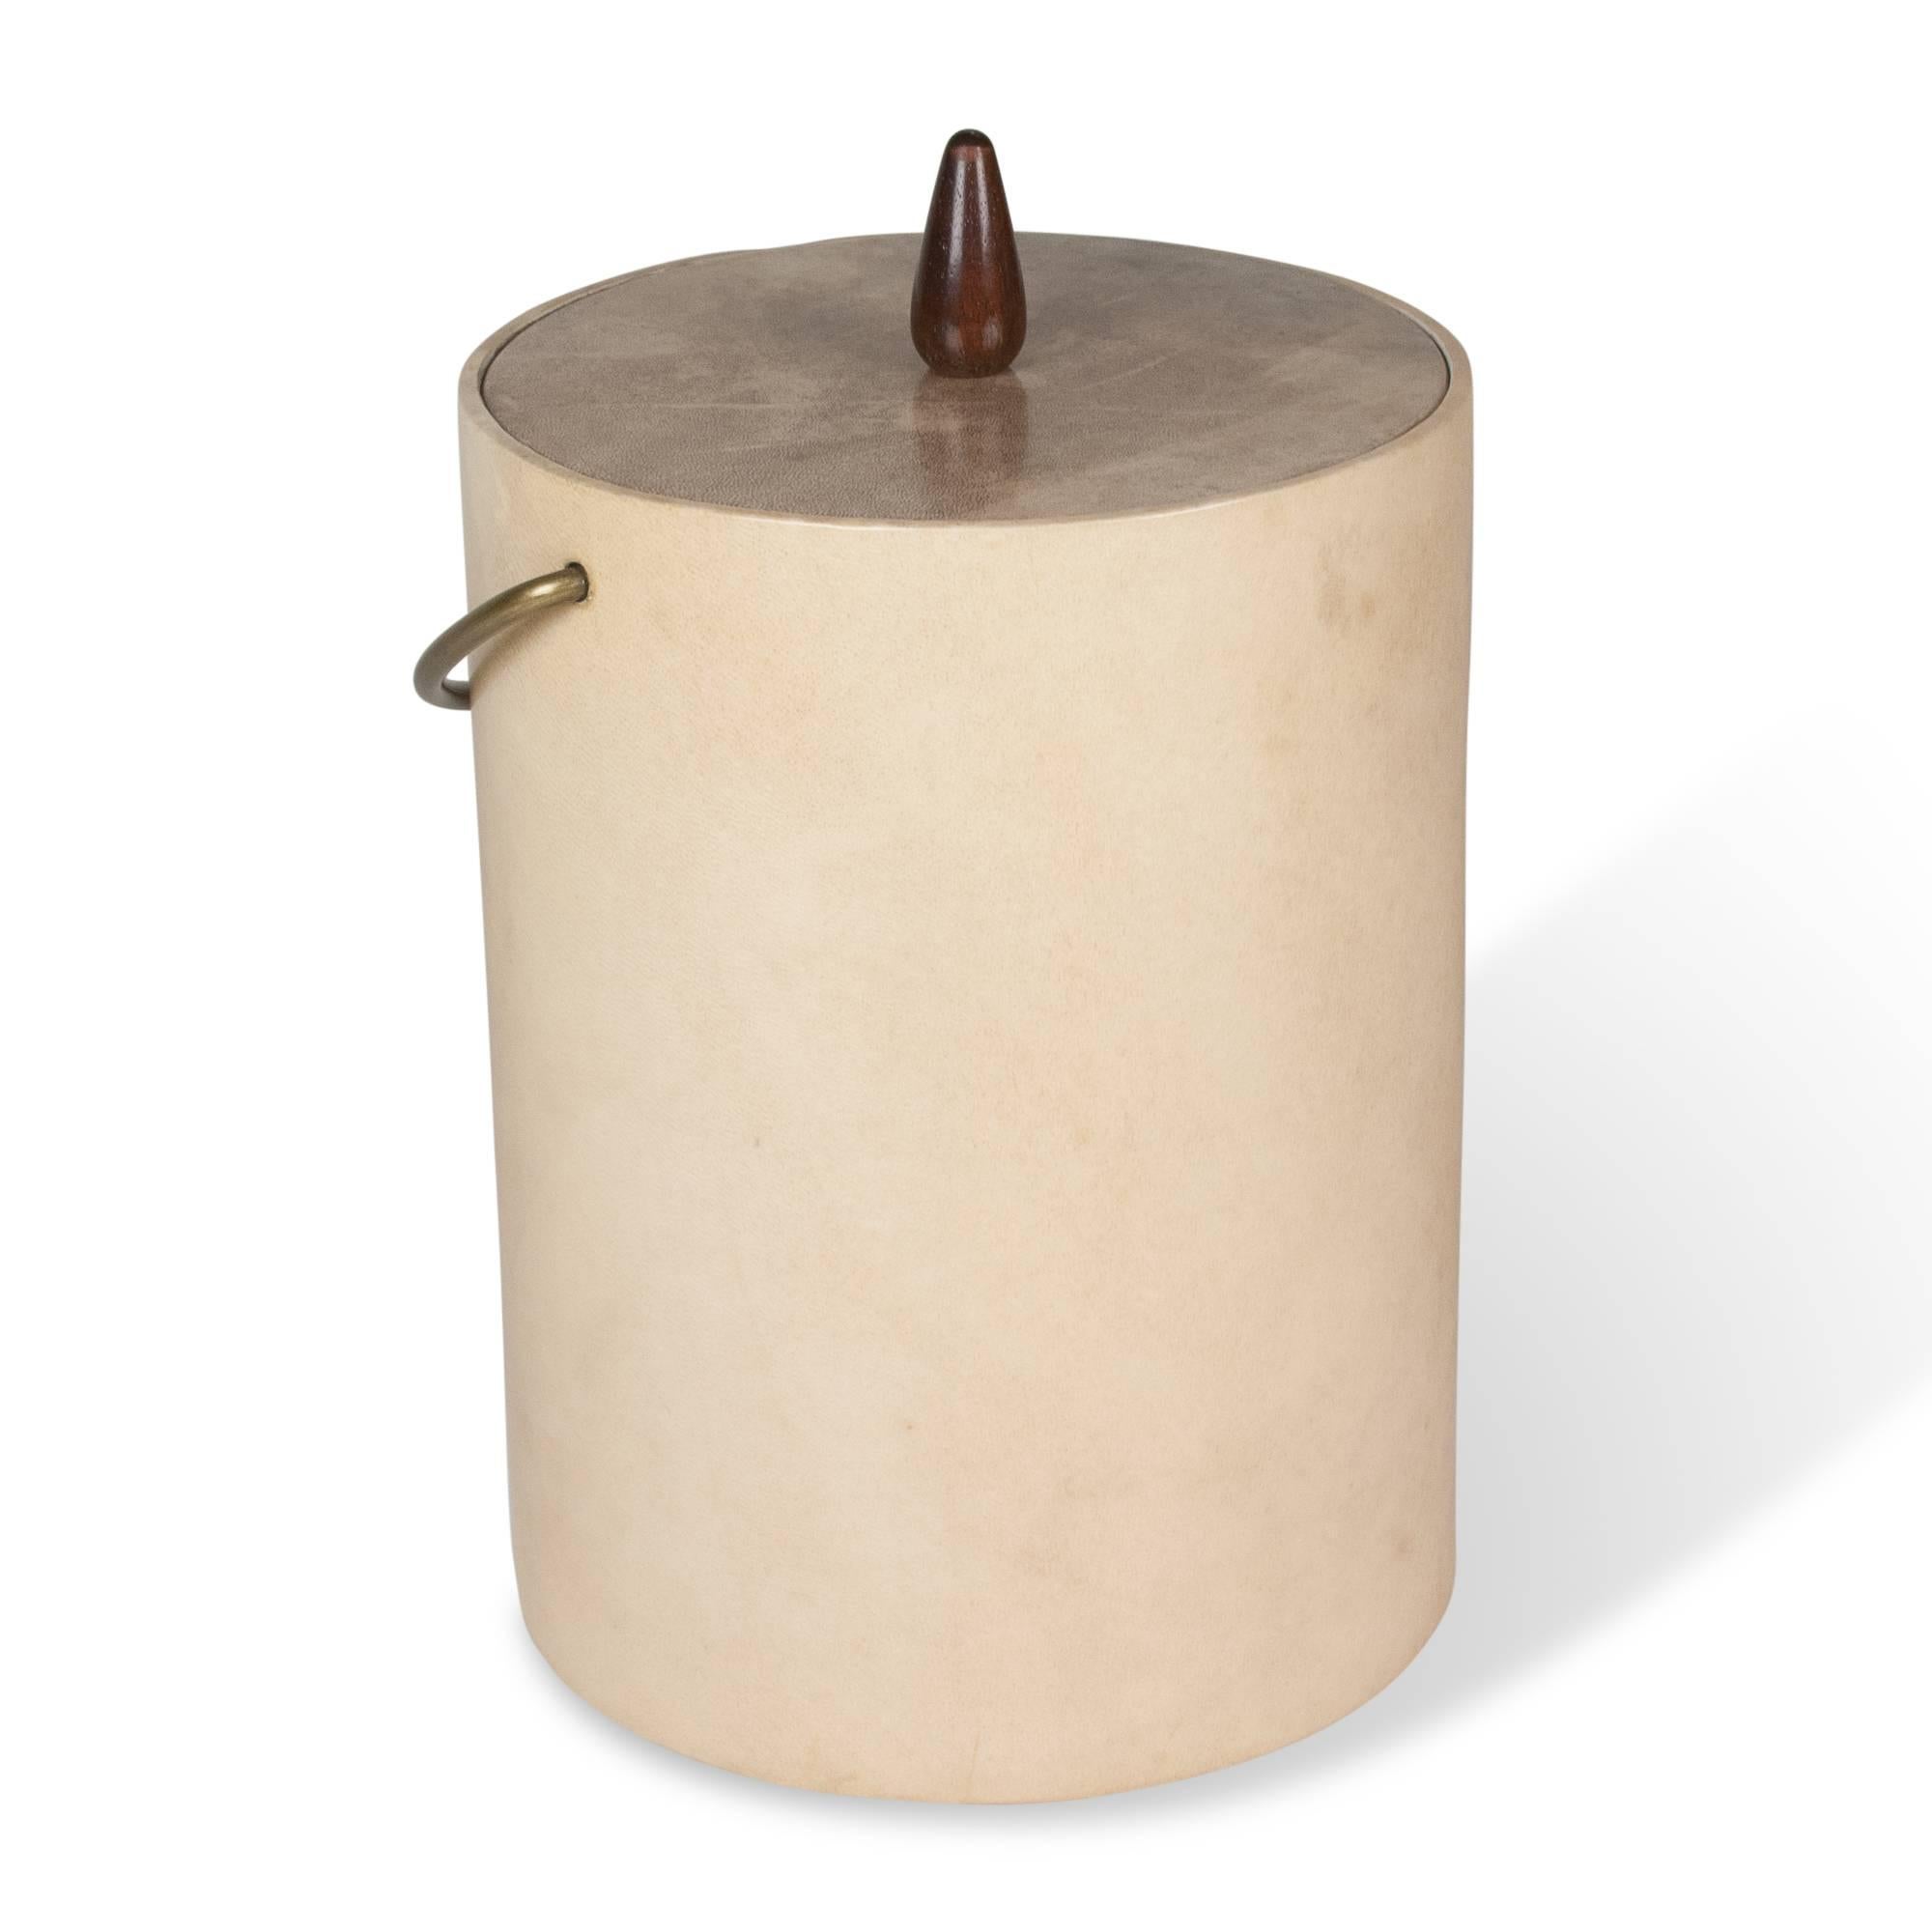 Dyed goatskin ice bucket, with brass handle, by Aldo Tura, Italian, 1960s. Plastic ice liner. Measures: Height to top of bucket 11 in, diameter 8 1/2 in. Height to top of raised handle 15 1/2 in.